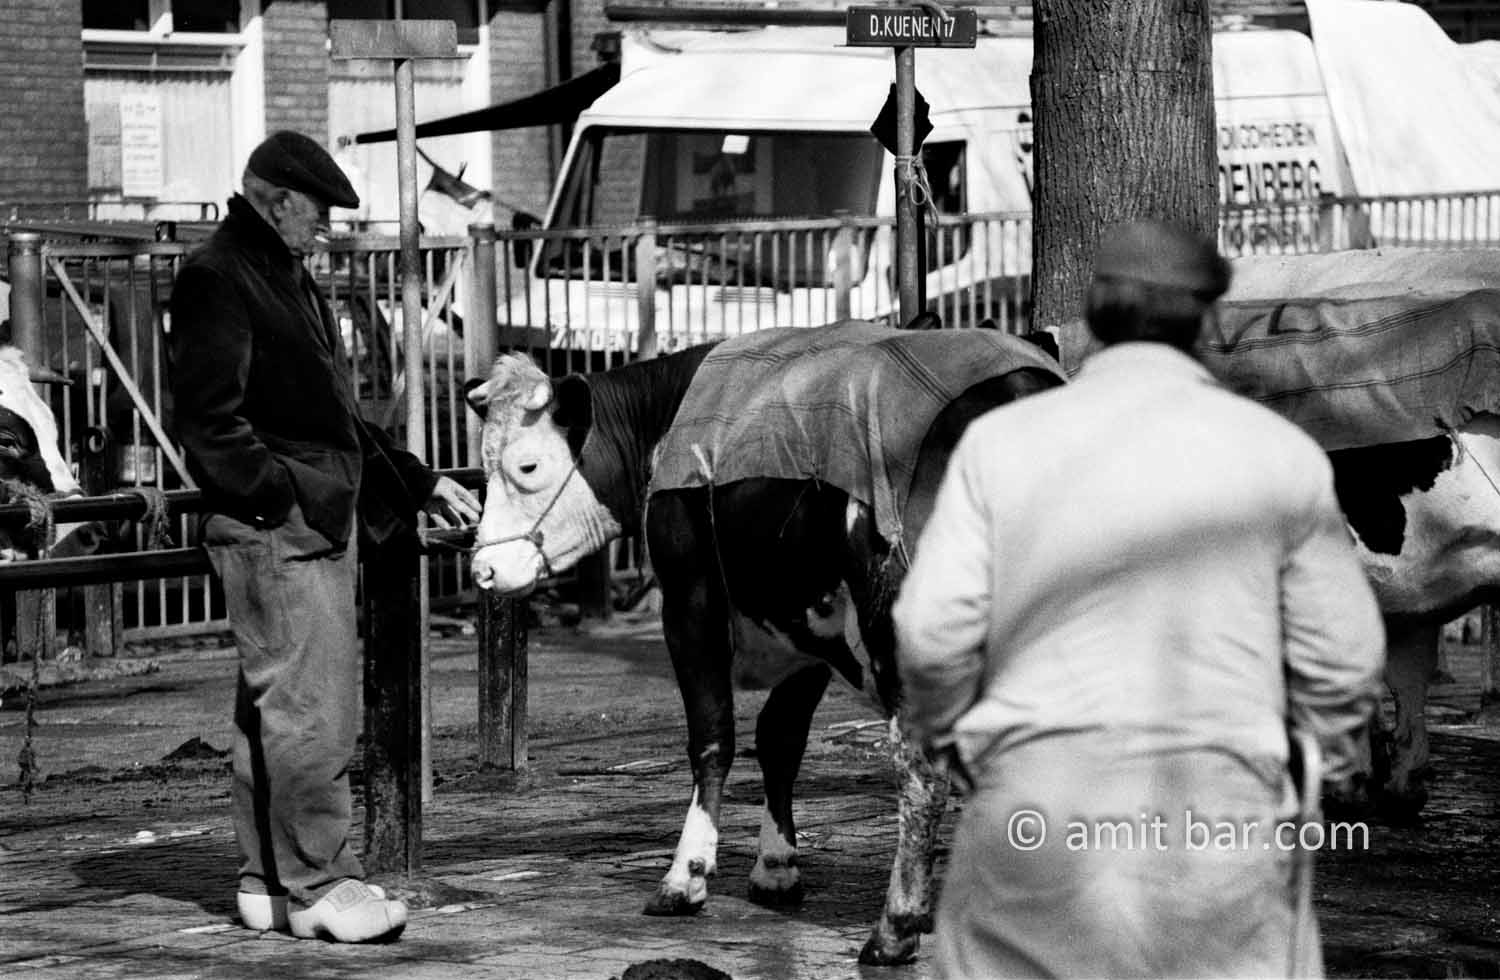 Saying goodbye: A cattle-farmer taking a last look at his cow at the cattle market